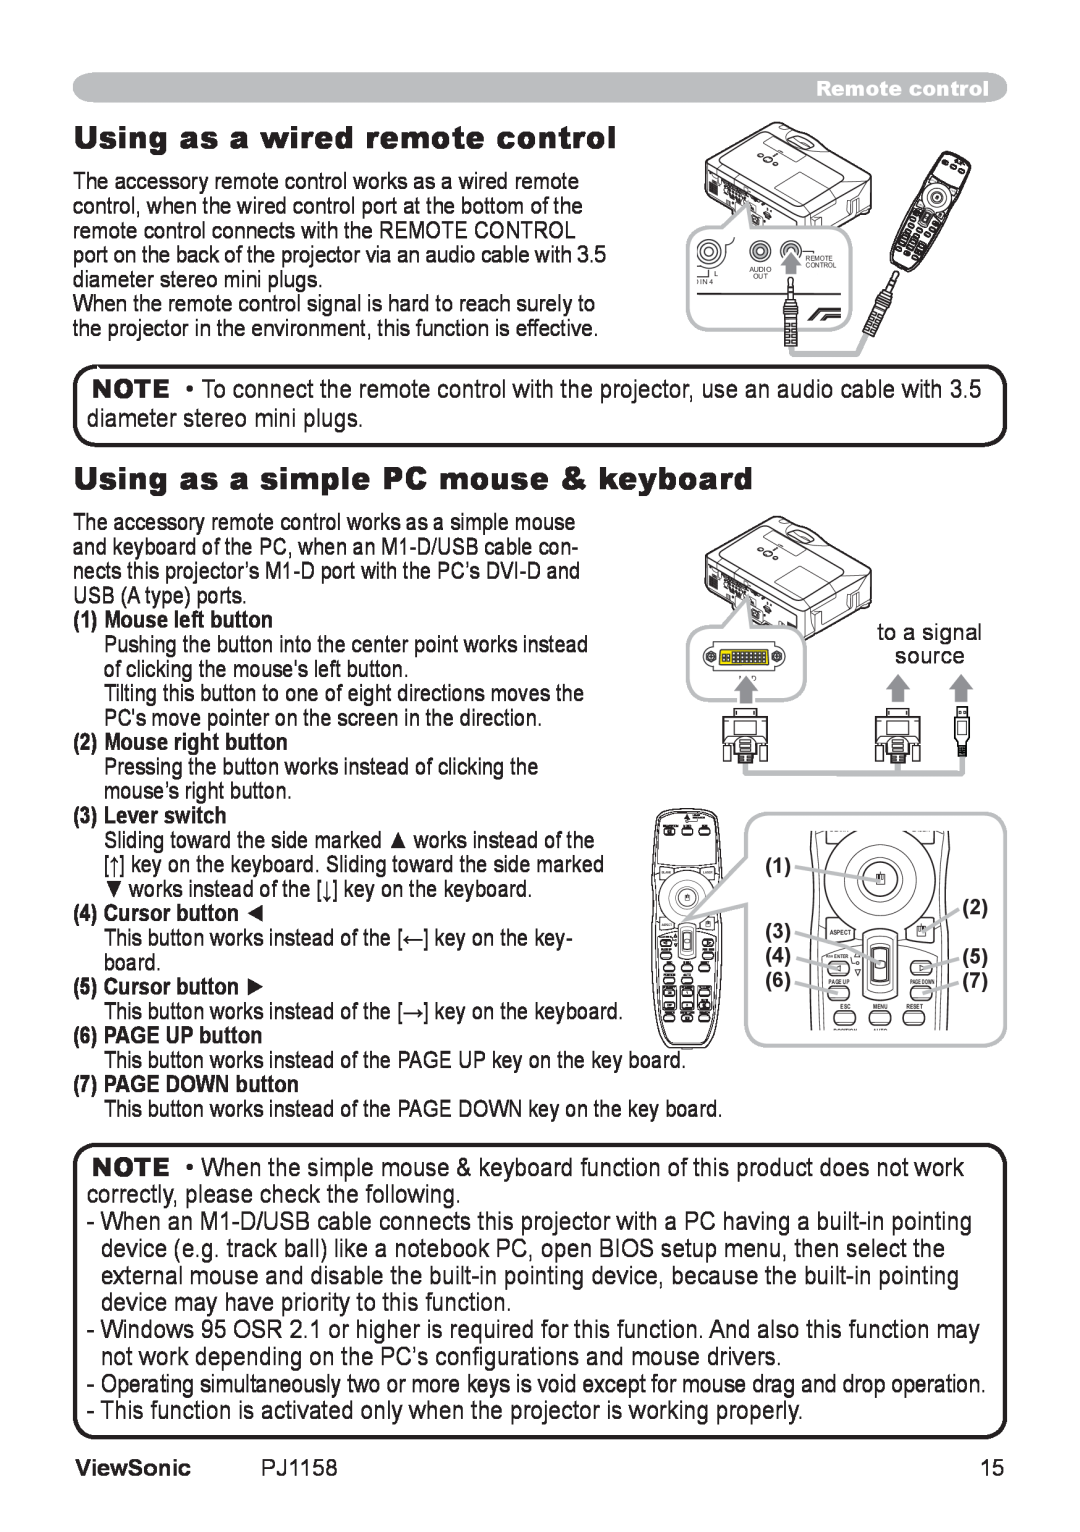 ViewSonic PJ1158 manual Using as a wired remote control, Using as a simple PC mouse & keyboard 